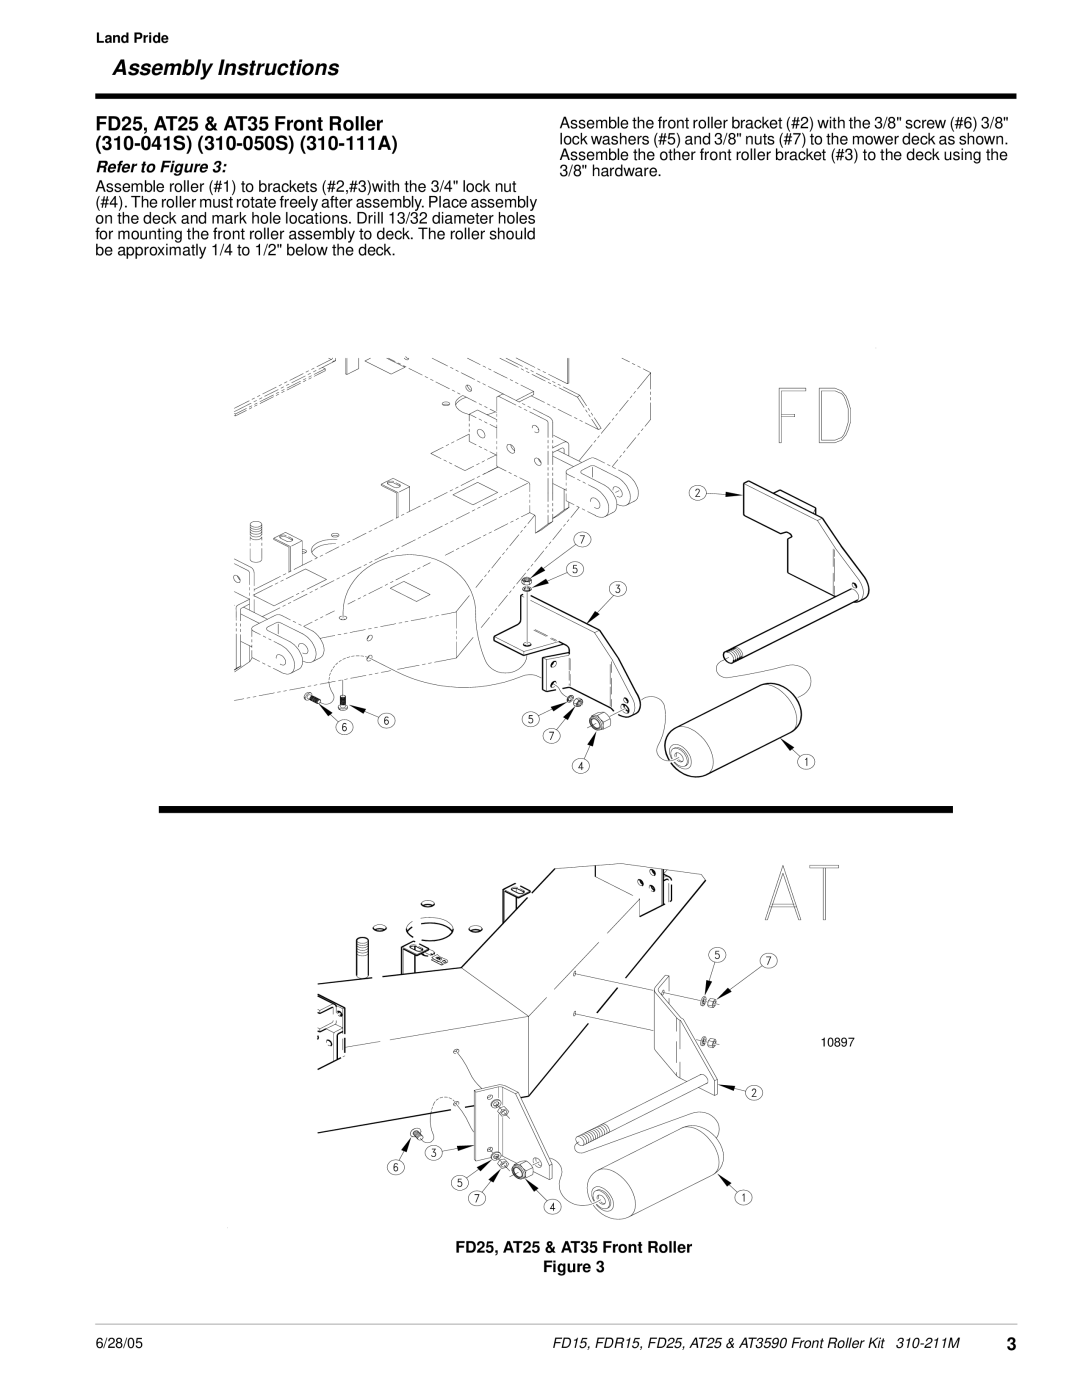 Land Pride FDR15, FD15 manual Assembly Instructions, Refer to Figure, FD25, AT25 & AT35 Front Roller Figure, 6/28/05 